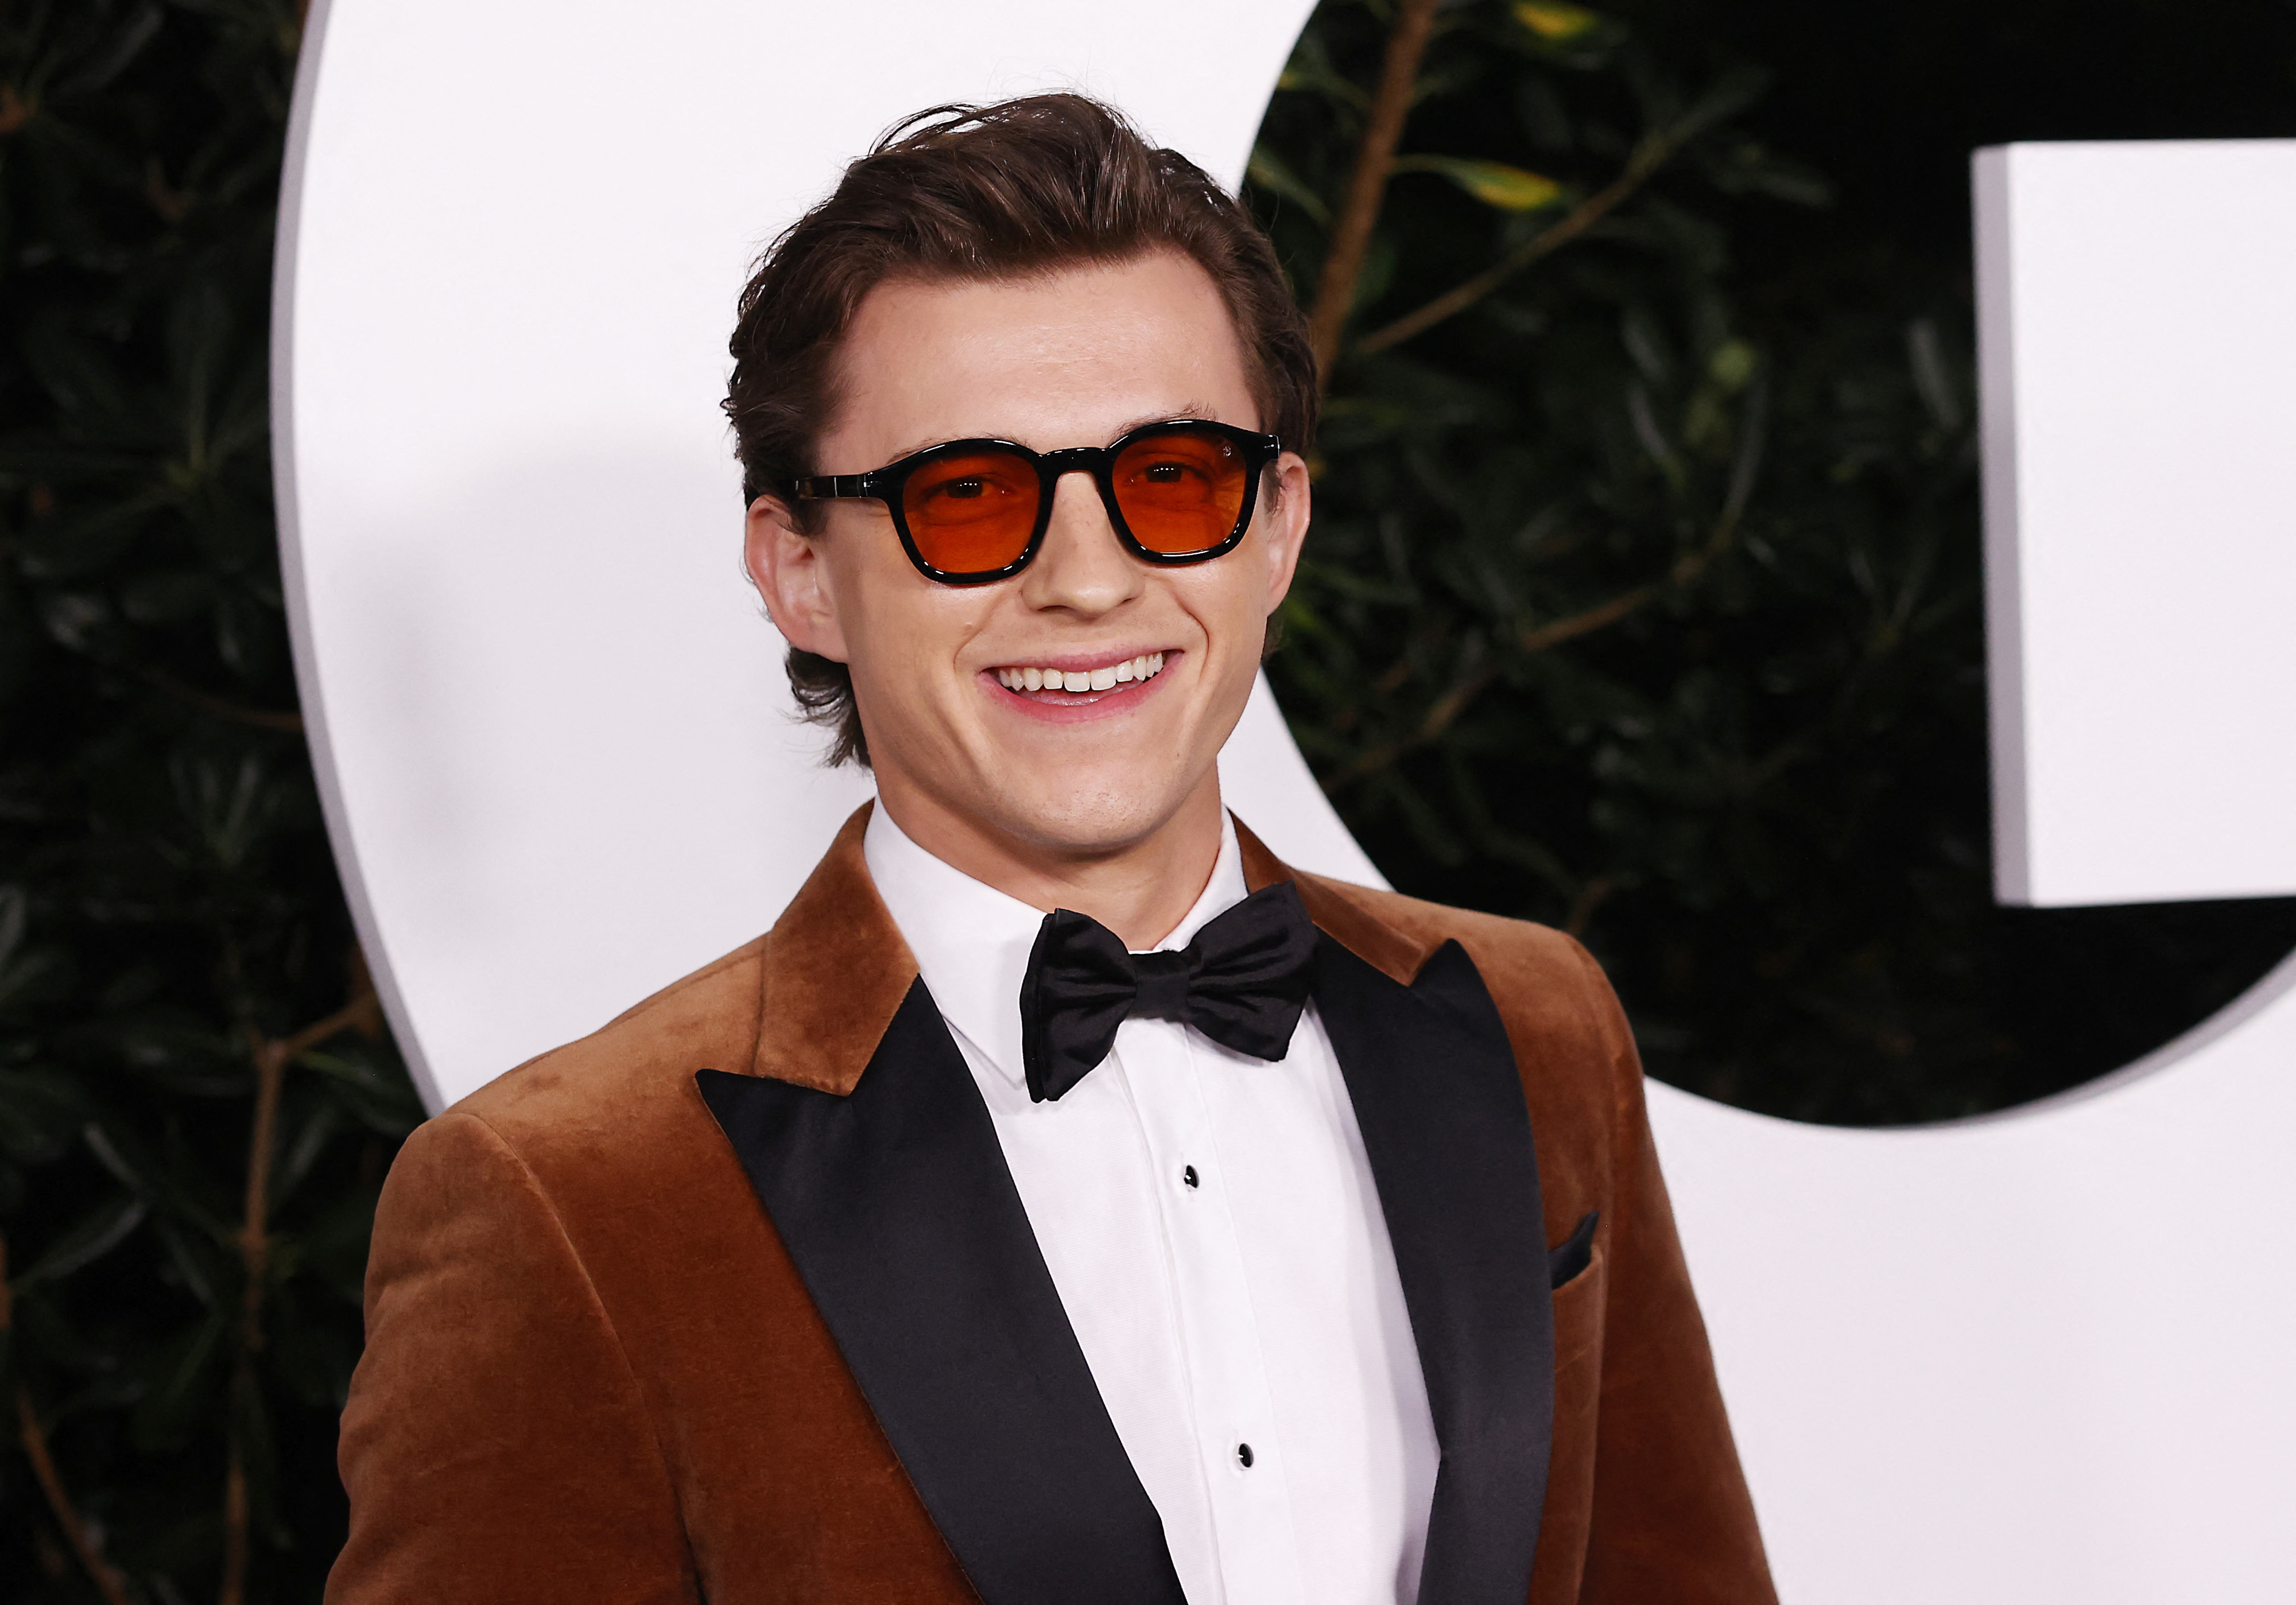 Close-up of Tom Holland smiling in sunglasses and a suit and bow tie at a media event